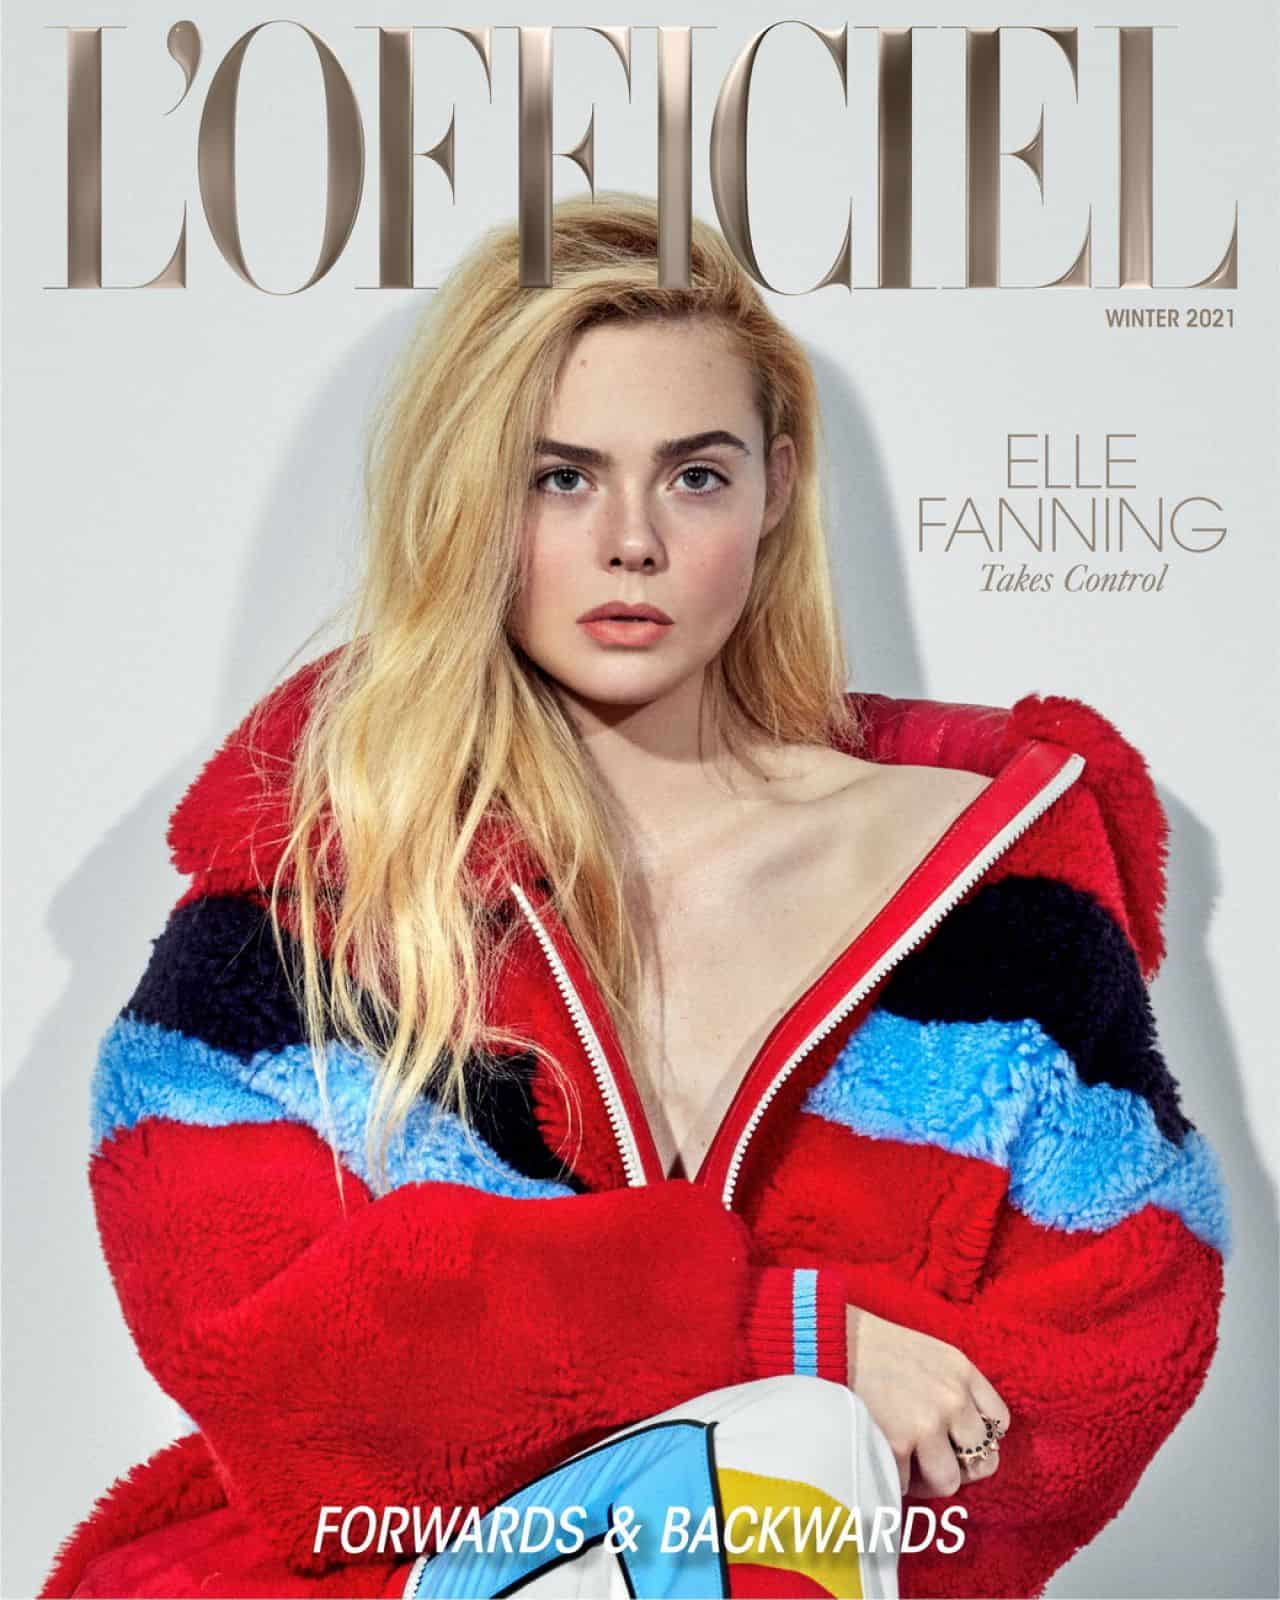 Elle Fanning Amazes on the Cover of L’OFFICIEL’s Winter 2021 issue